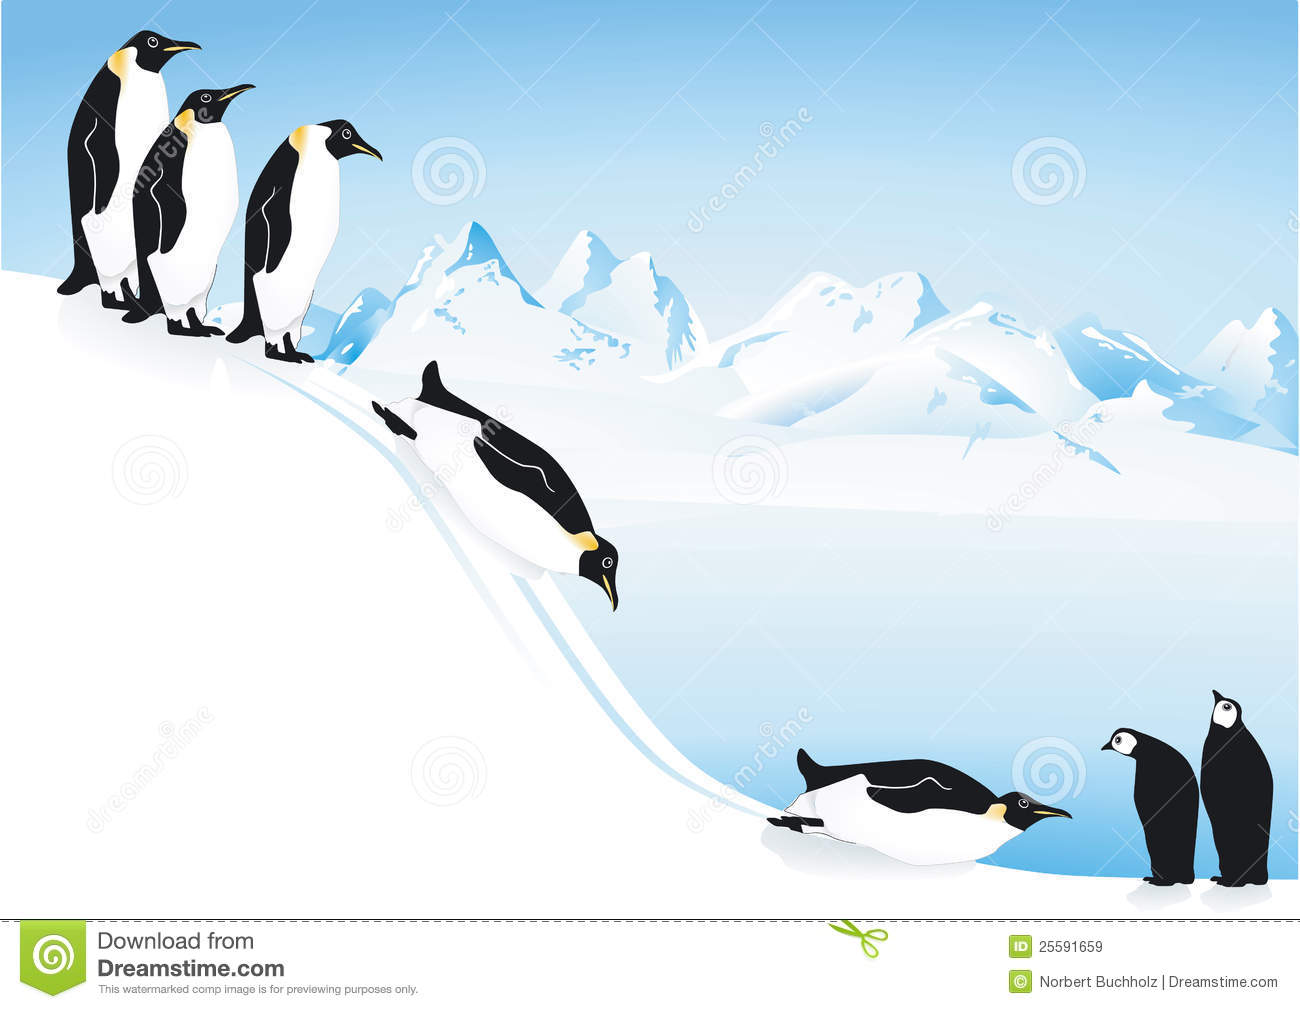 Illustration Of Group Of Penguins Playing On Ice Slide With Sea And